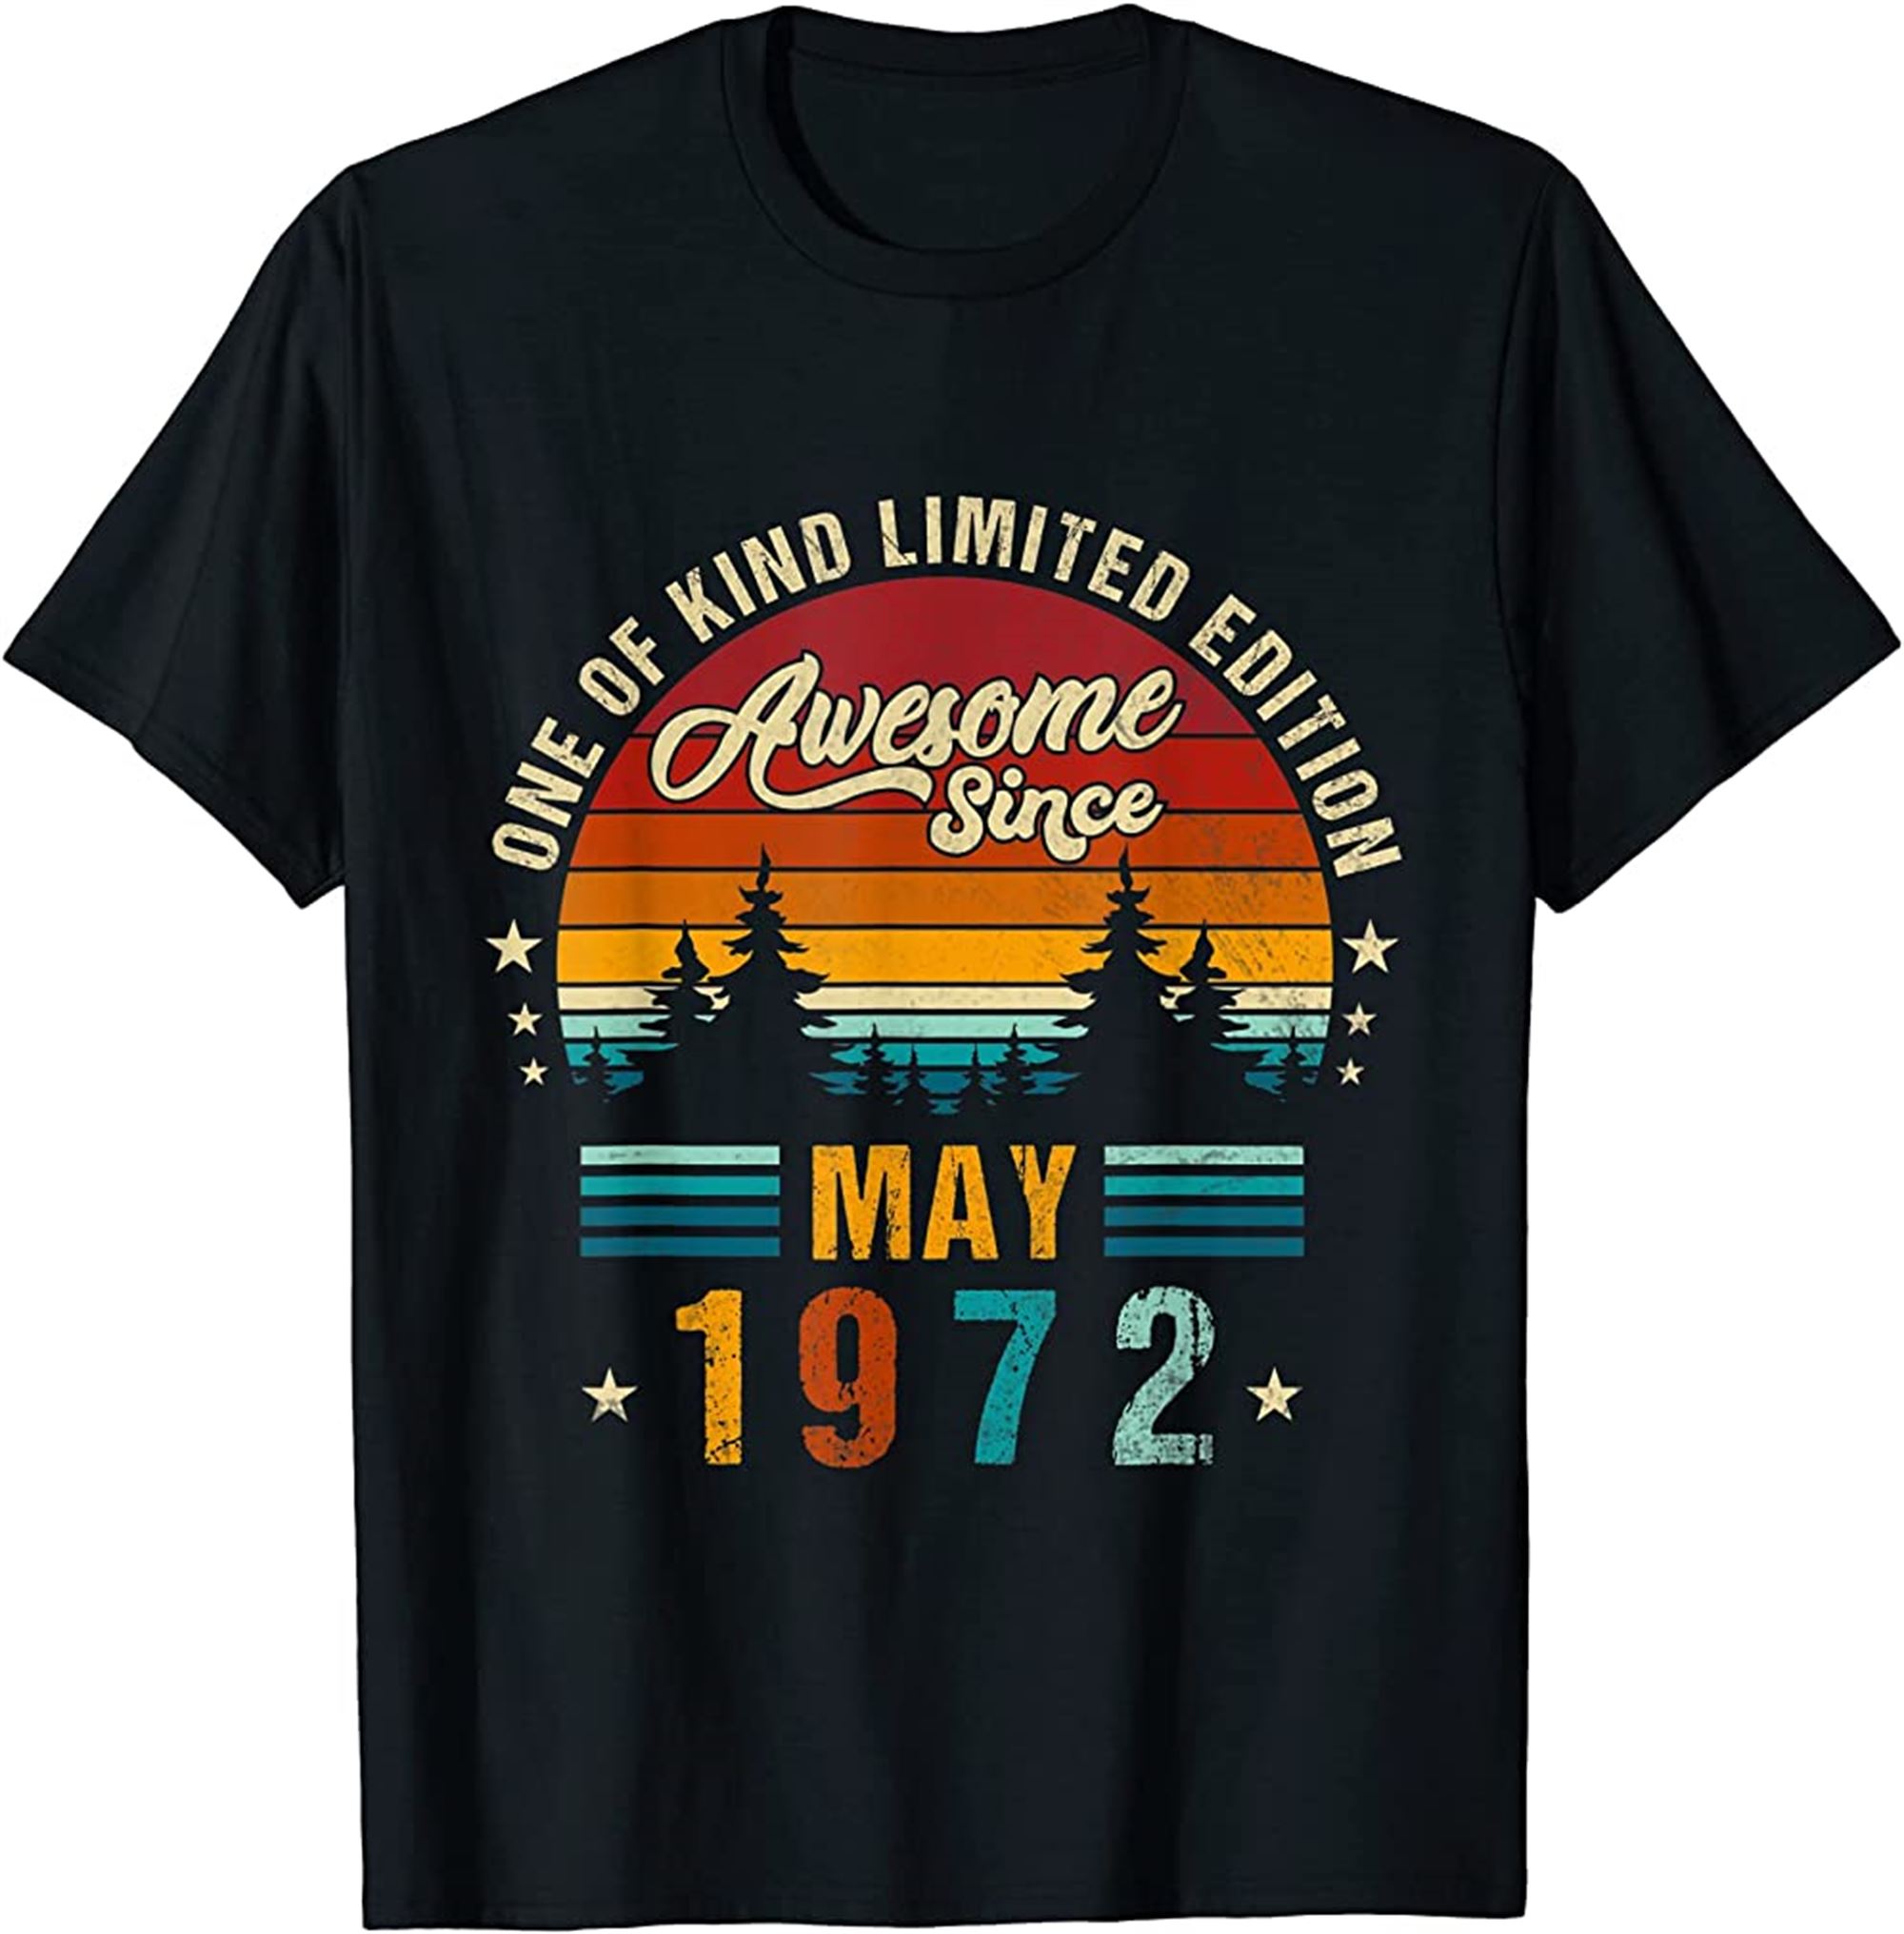 Vintage 50th Birthday Awesome Since May 1972 Epic Legend T-shirt Size Up To 5xl